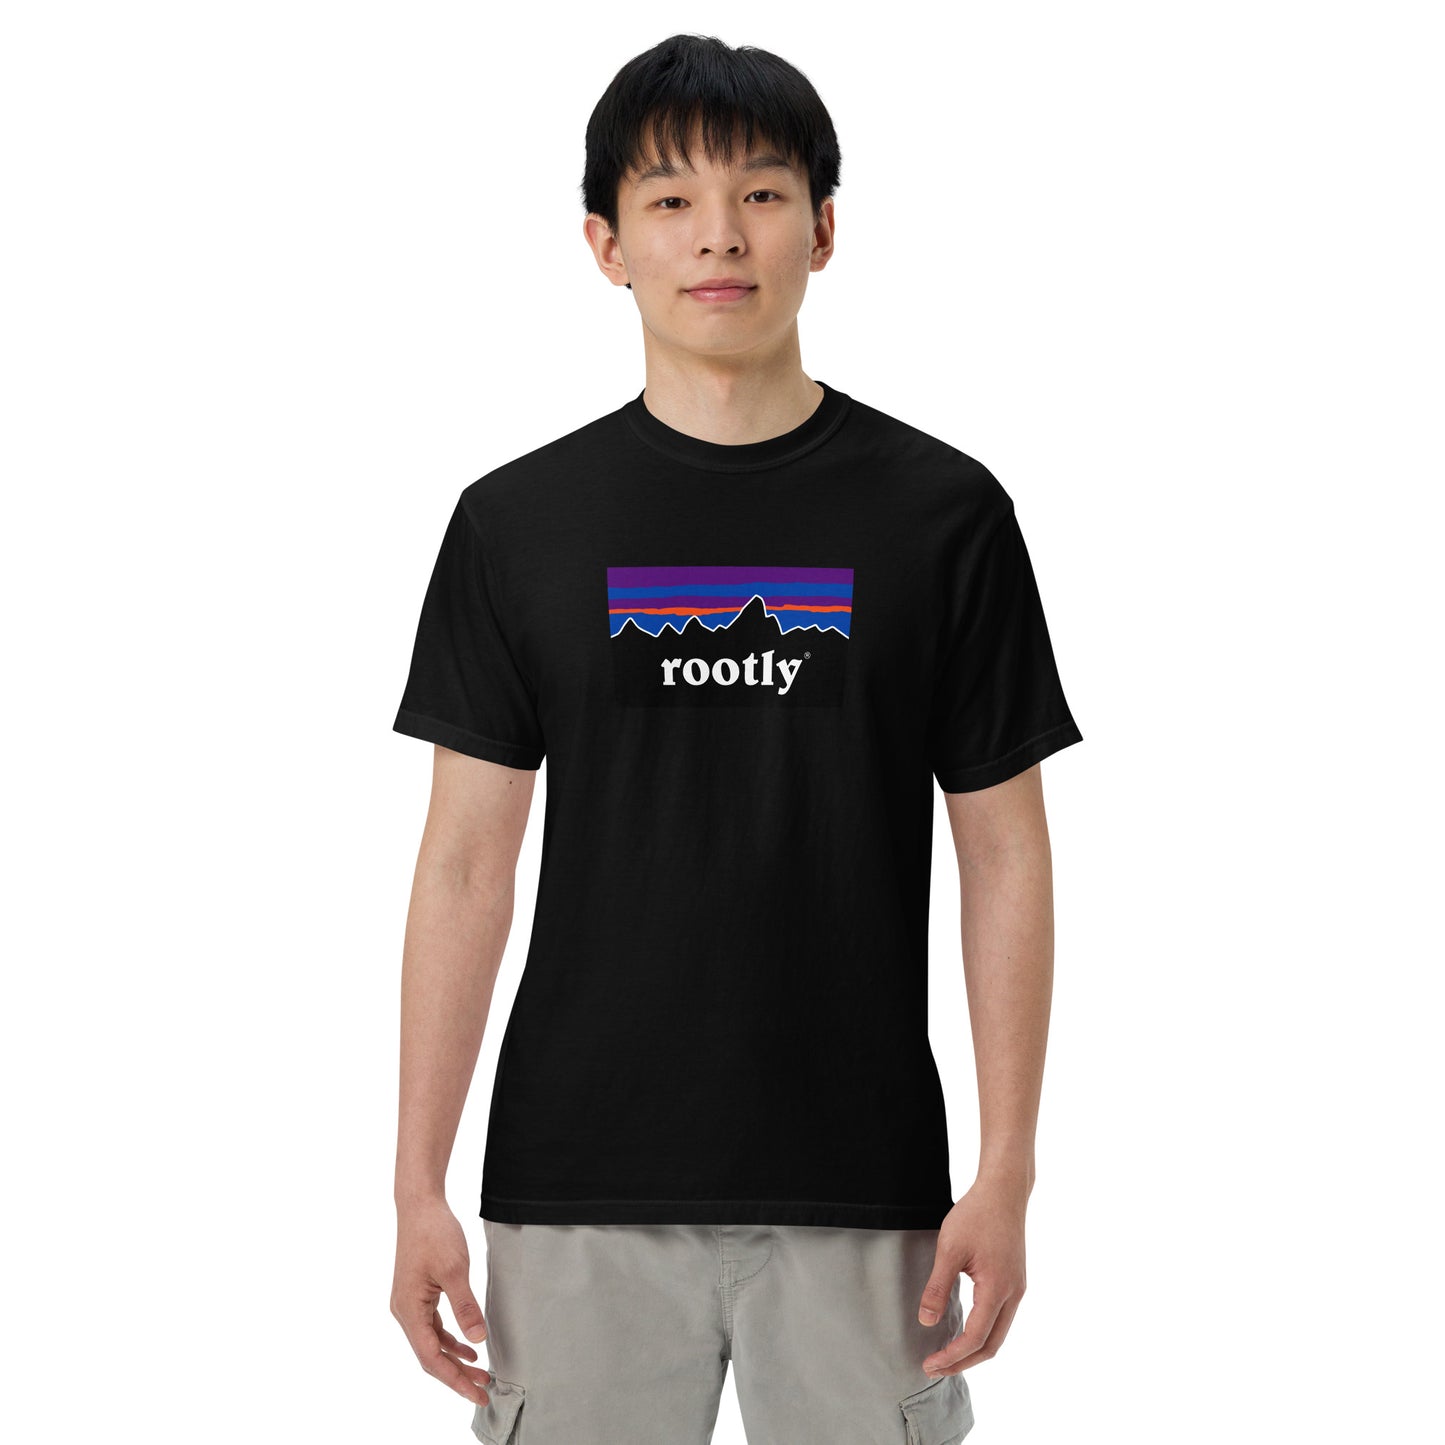 Rootly-gonia tee